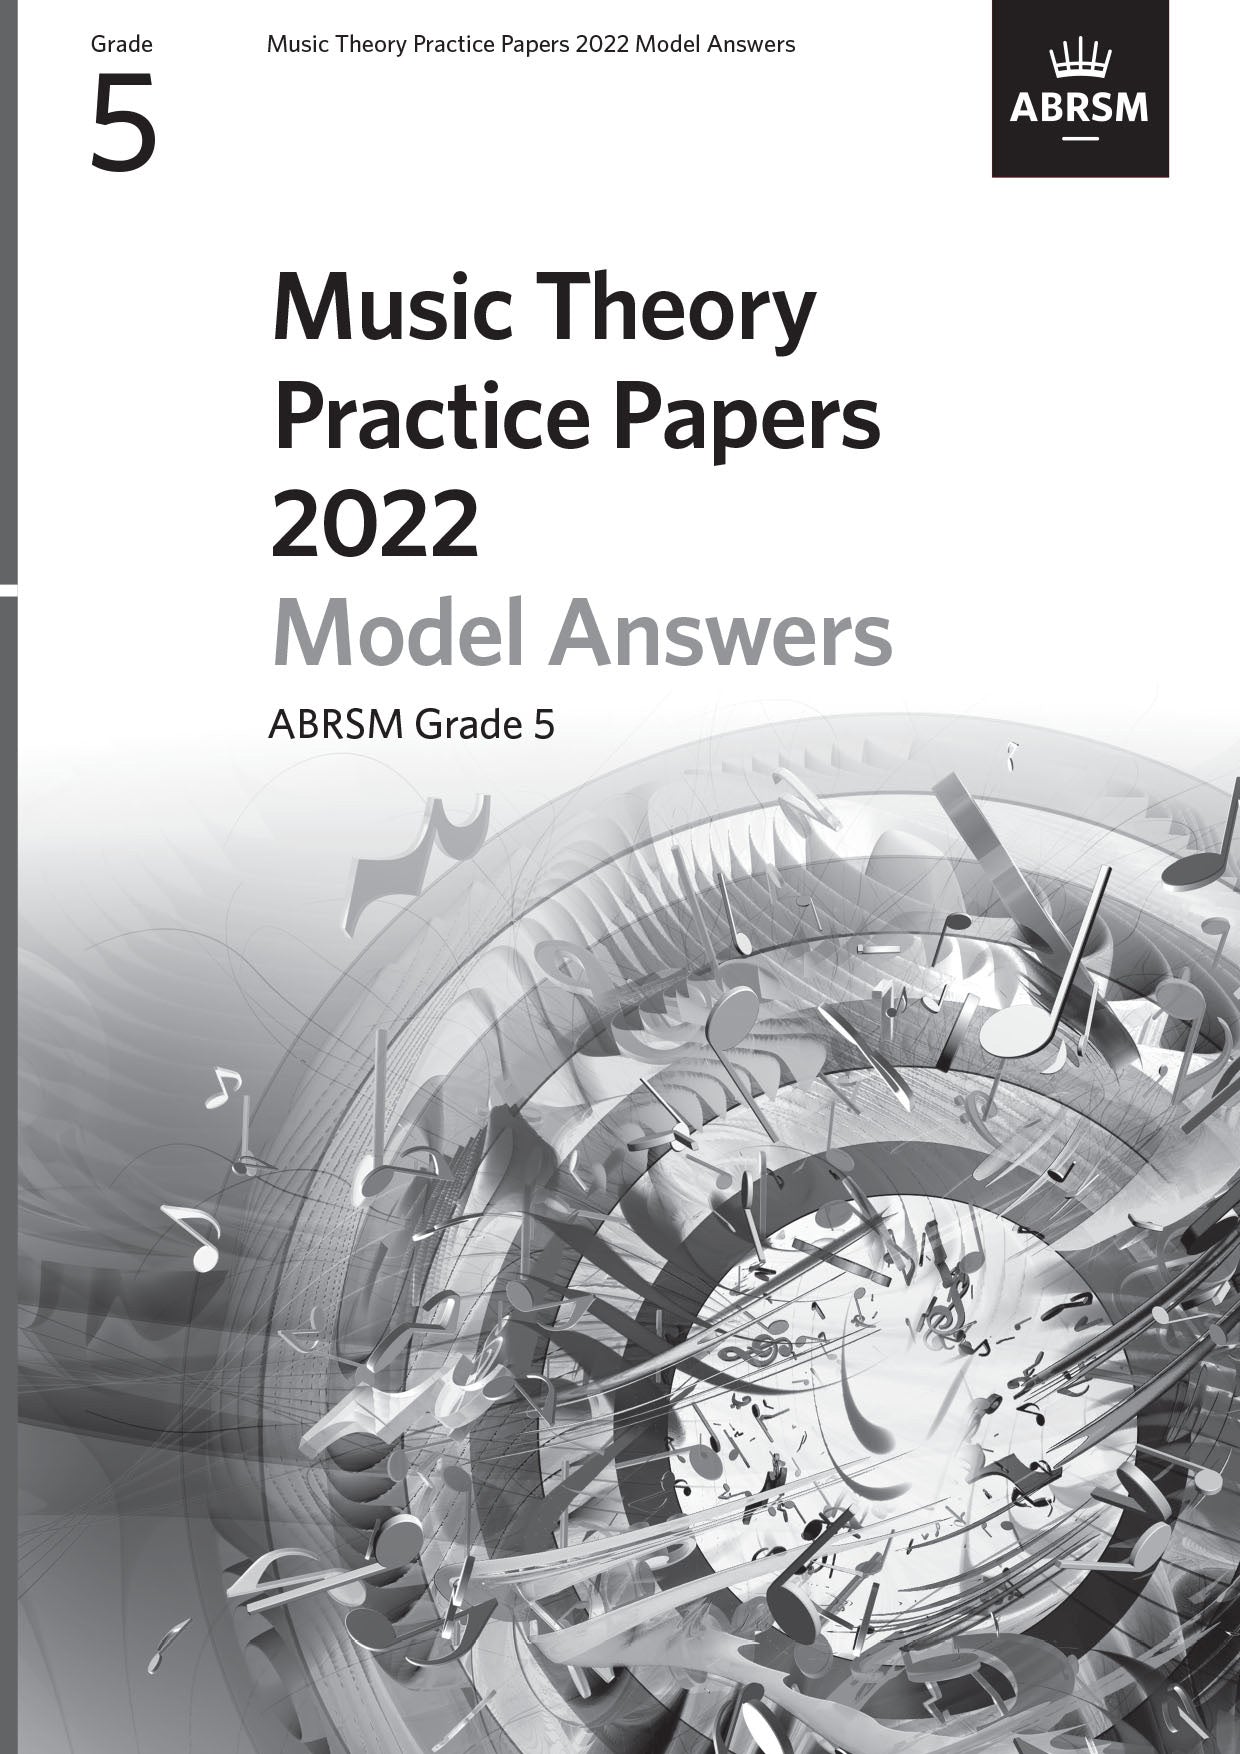 ABRSM Music Theory Practice Papers Model Answers 2022 Grade 5